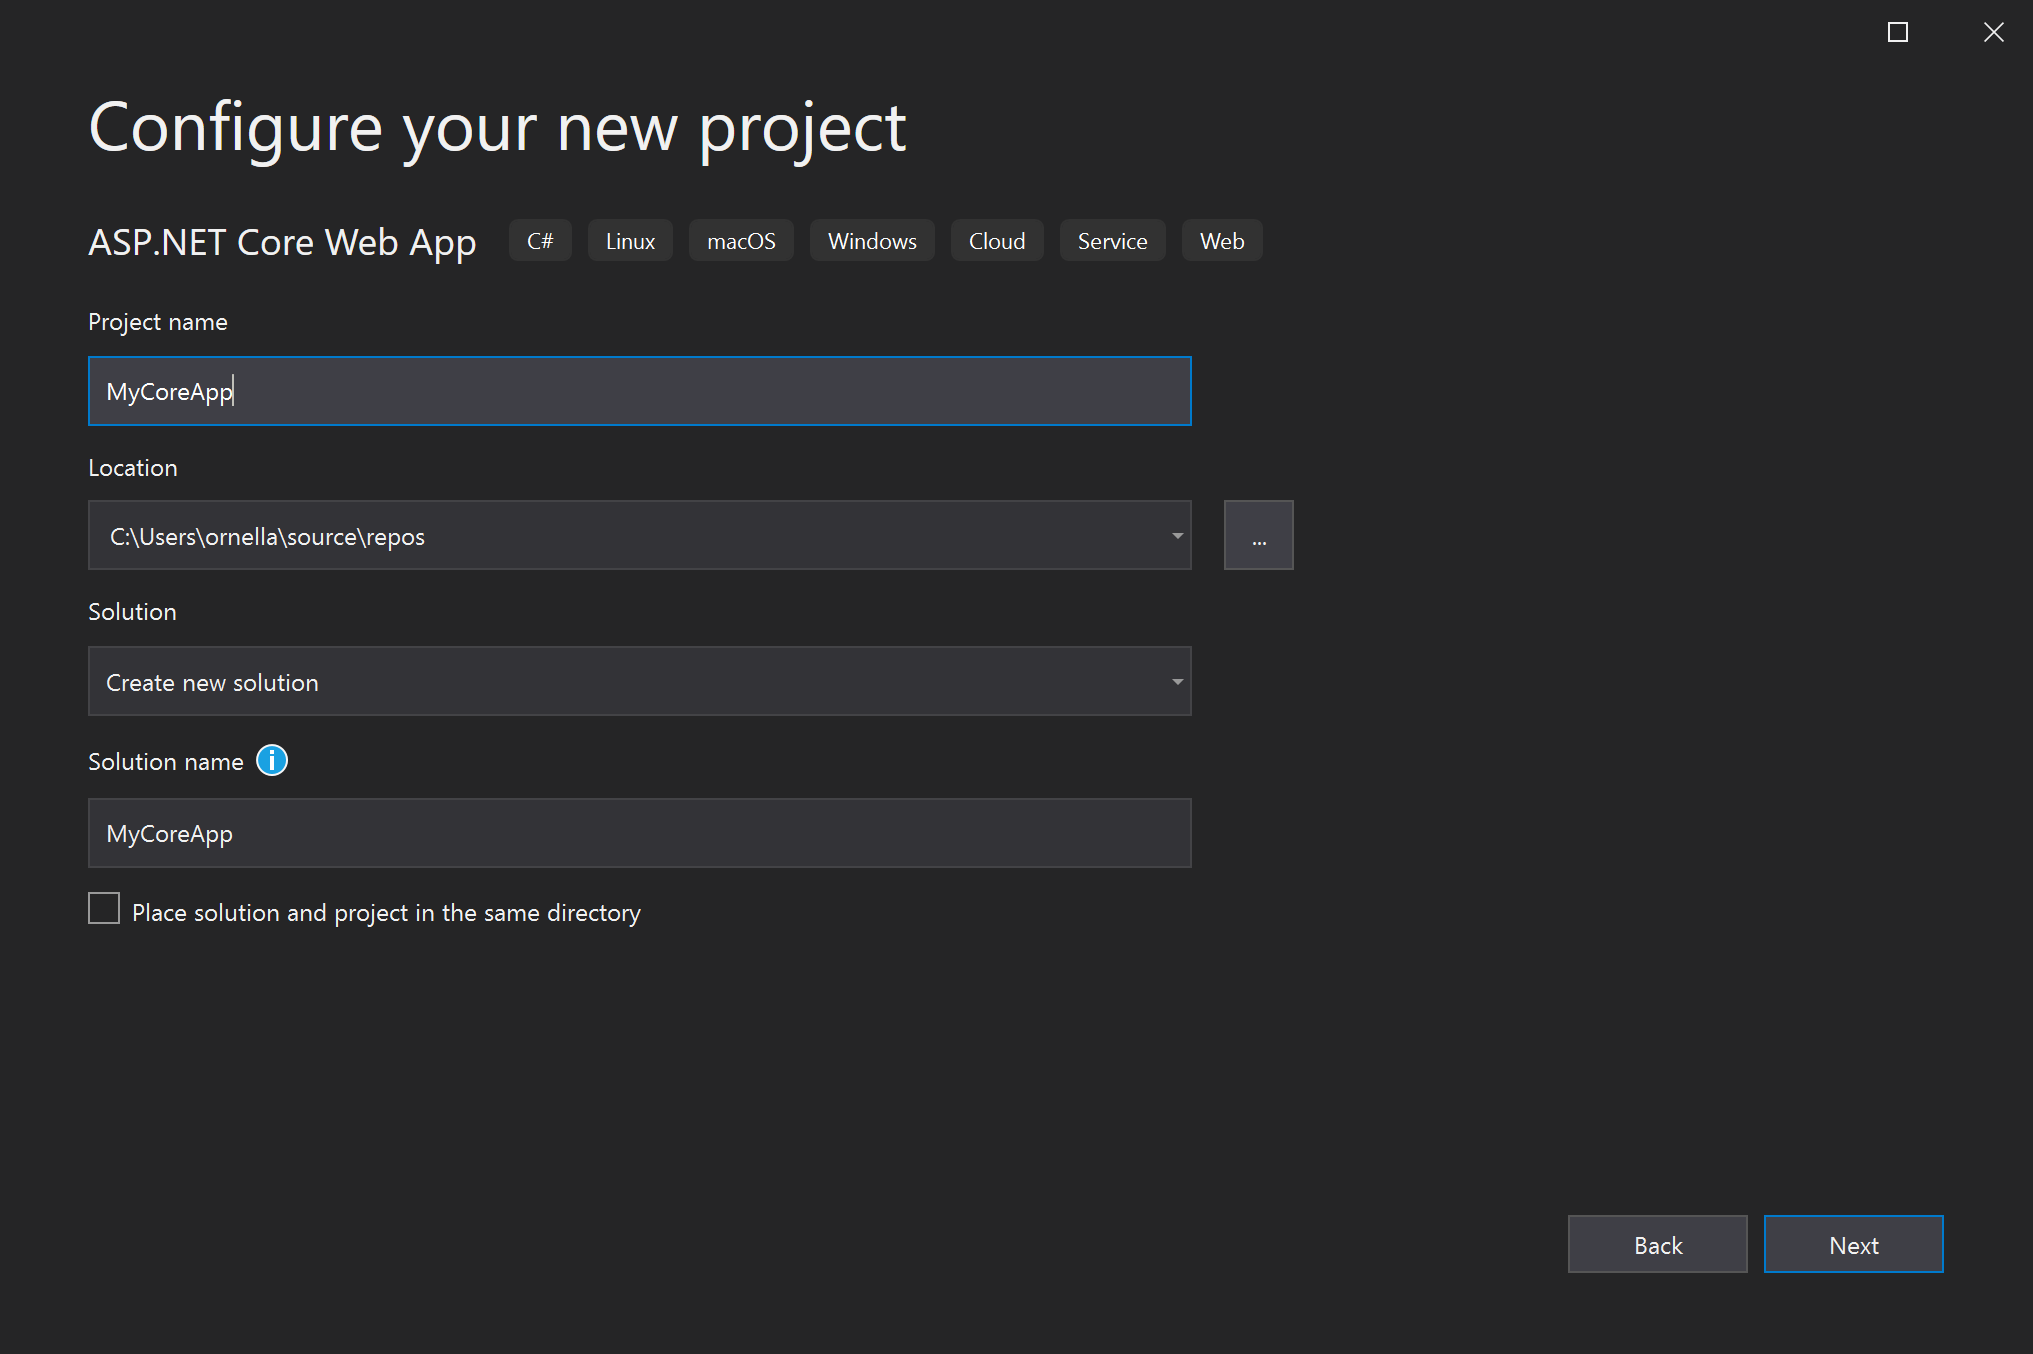 Screenshot that shows the Configure your new project window in Visual Studio with MyCoreApp entered in the Project name field.